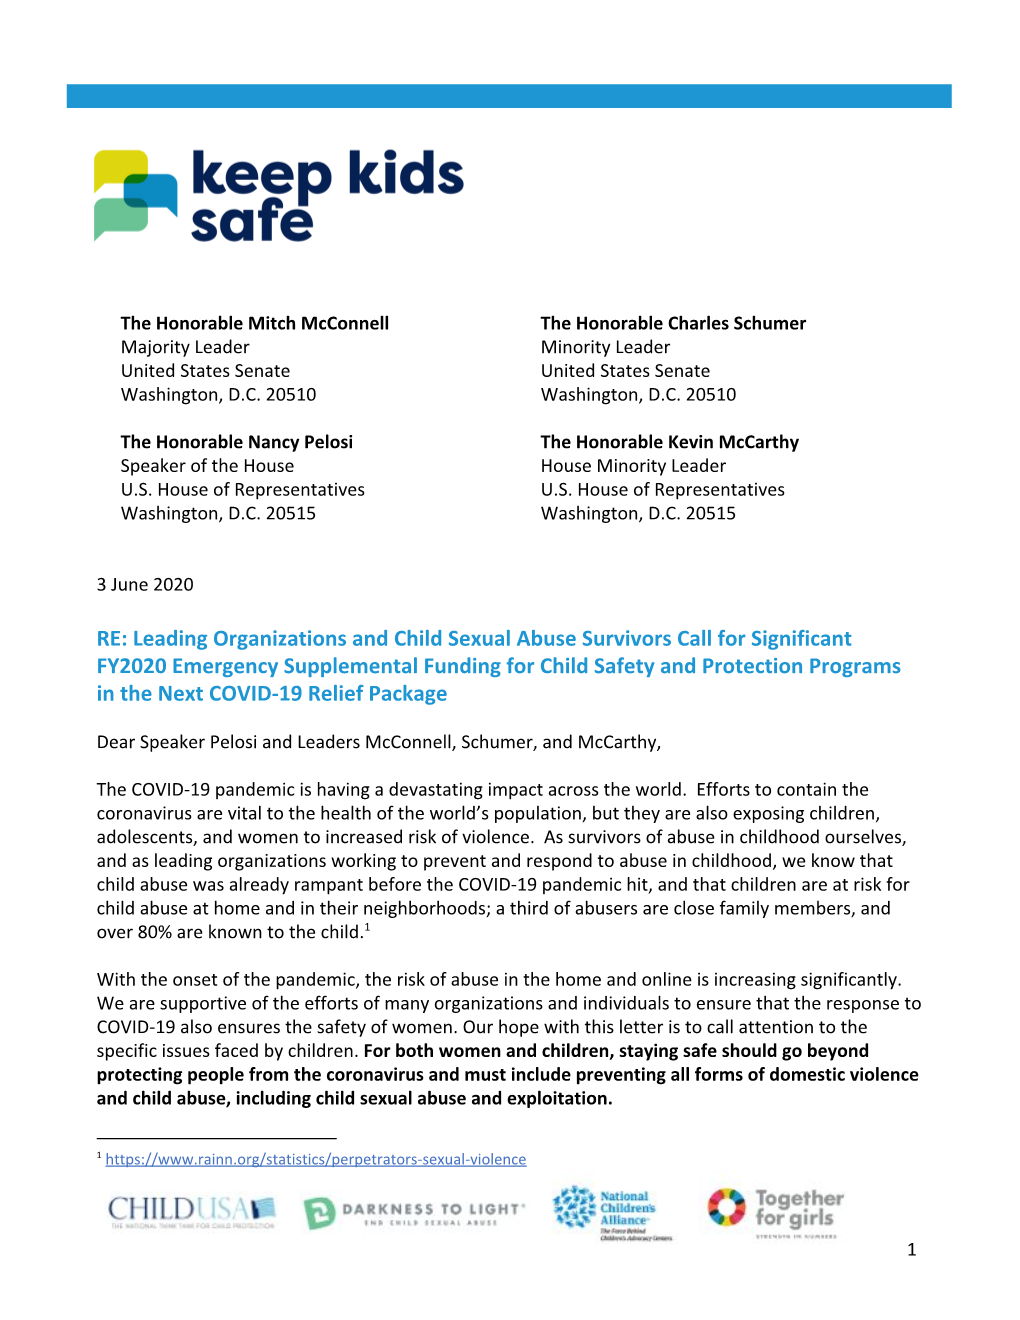 RE: Leading Organizations and Child Sexual Abuse Survivors Call for Significant FY2020 Emergency Supplemental Funding for Child